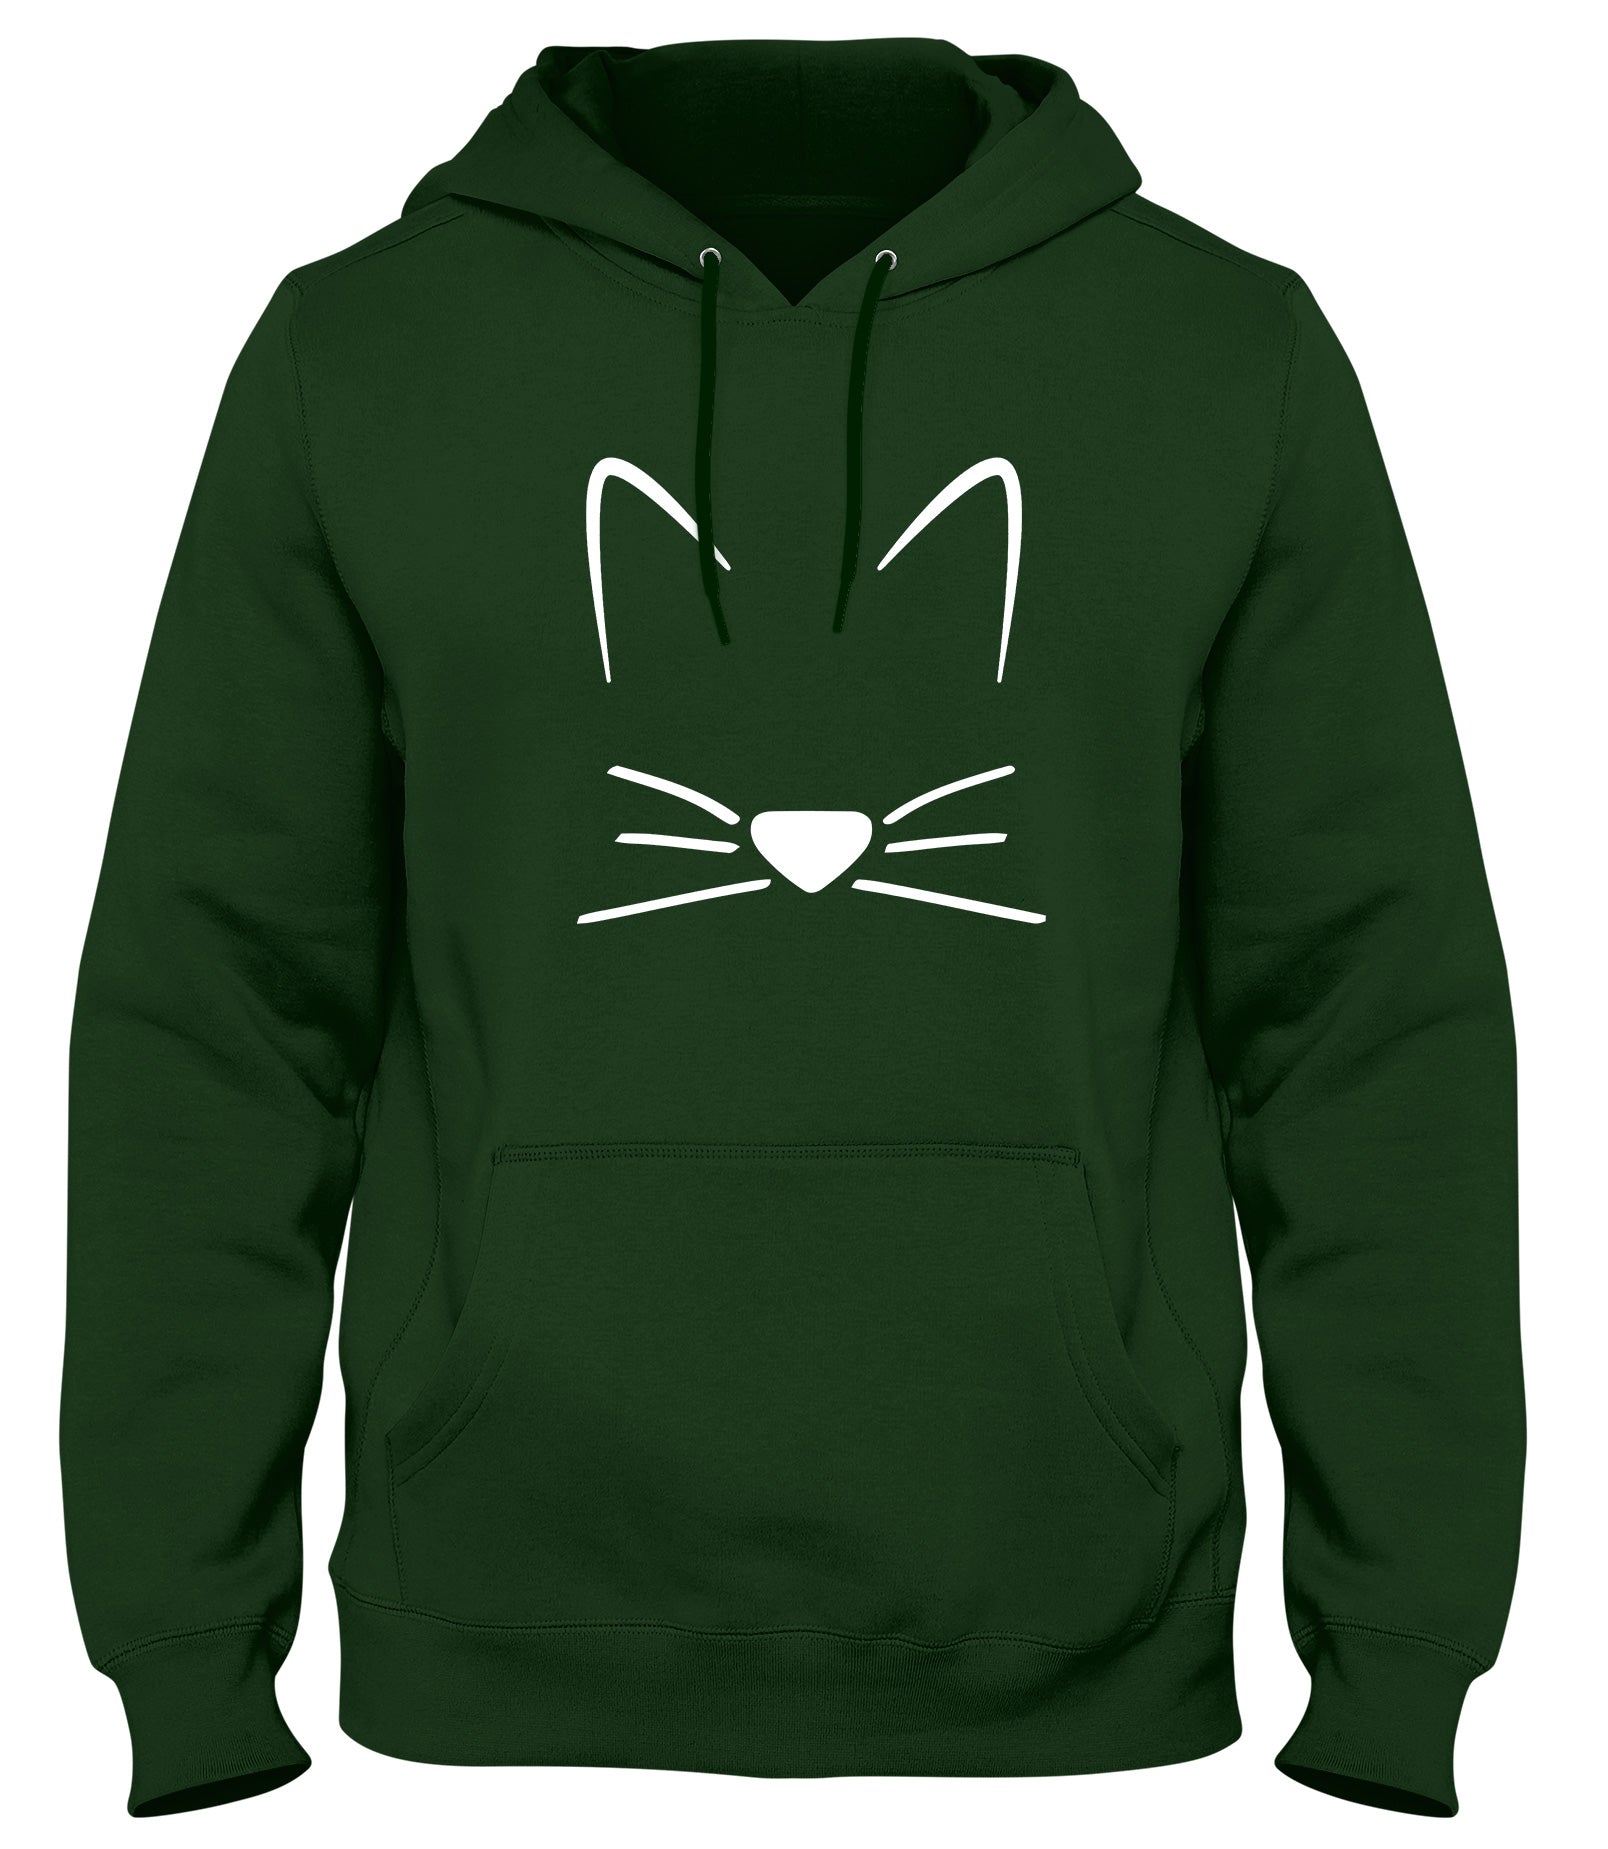 MEOW CAT KITTEN WHISKERS MENS WOMENS UNISEX FUNNY HOODIE